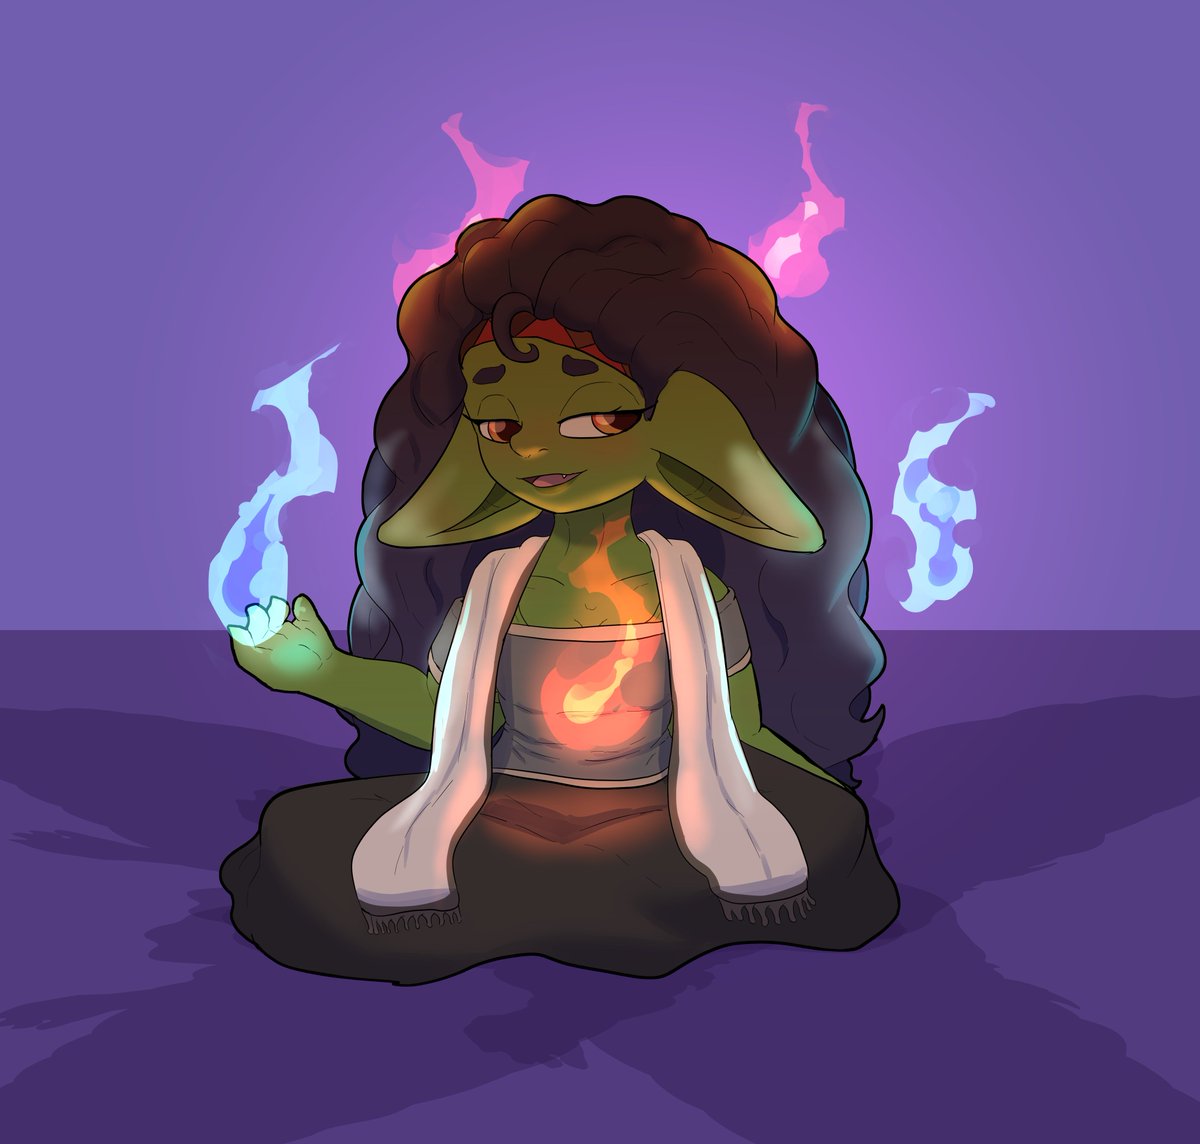 #dailygoblin:  Psychic goblin. 

I need a name for her.  Any suggestions?

#goblingirl